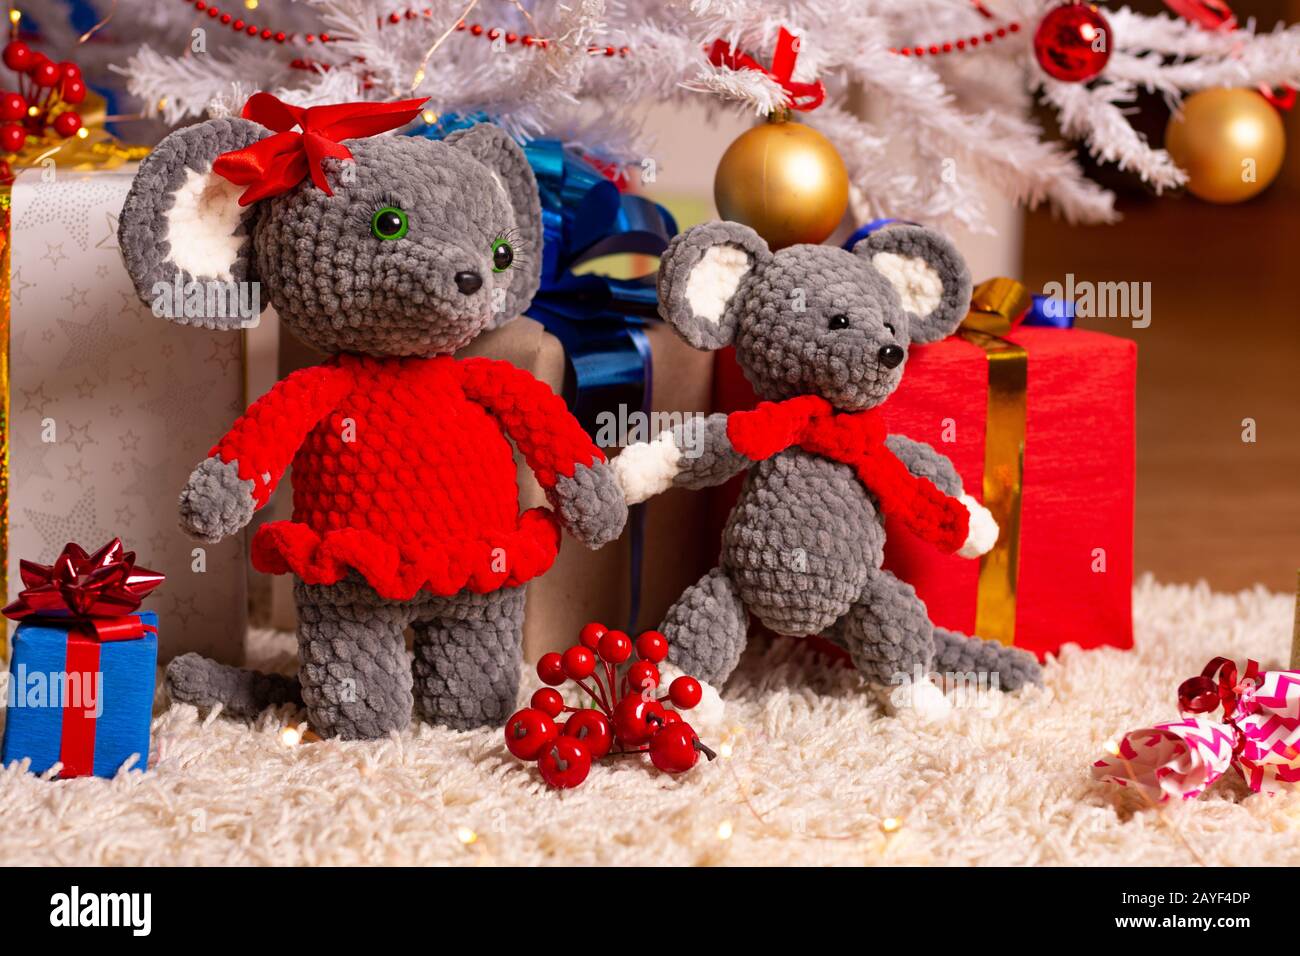 Two funny plush mice under the Christmas tree Stock Photo